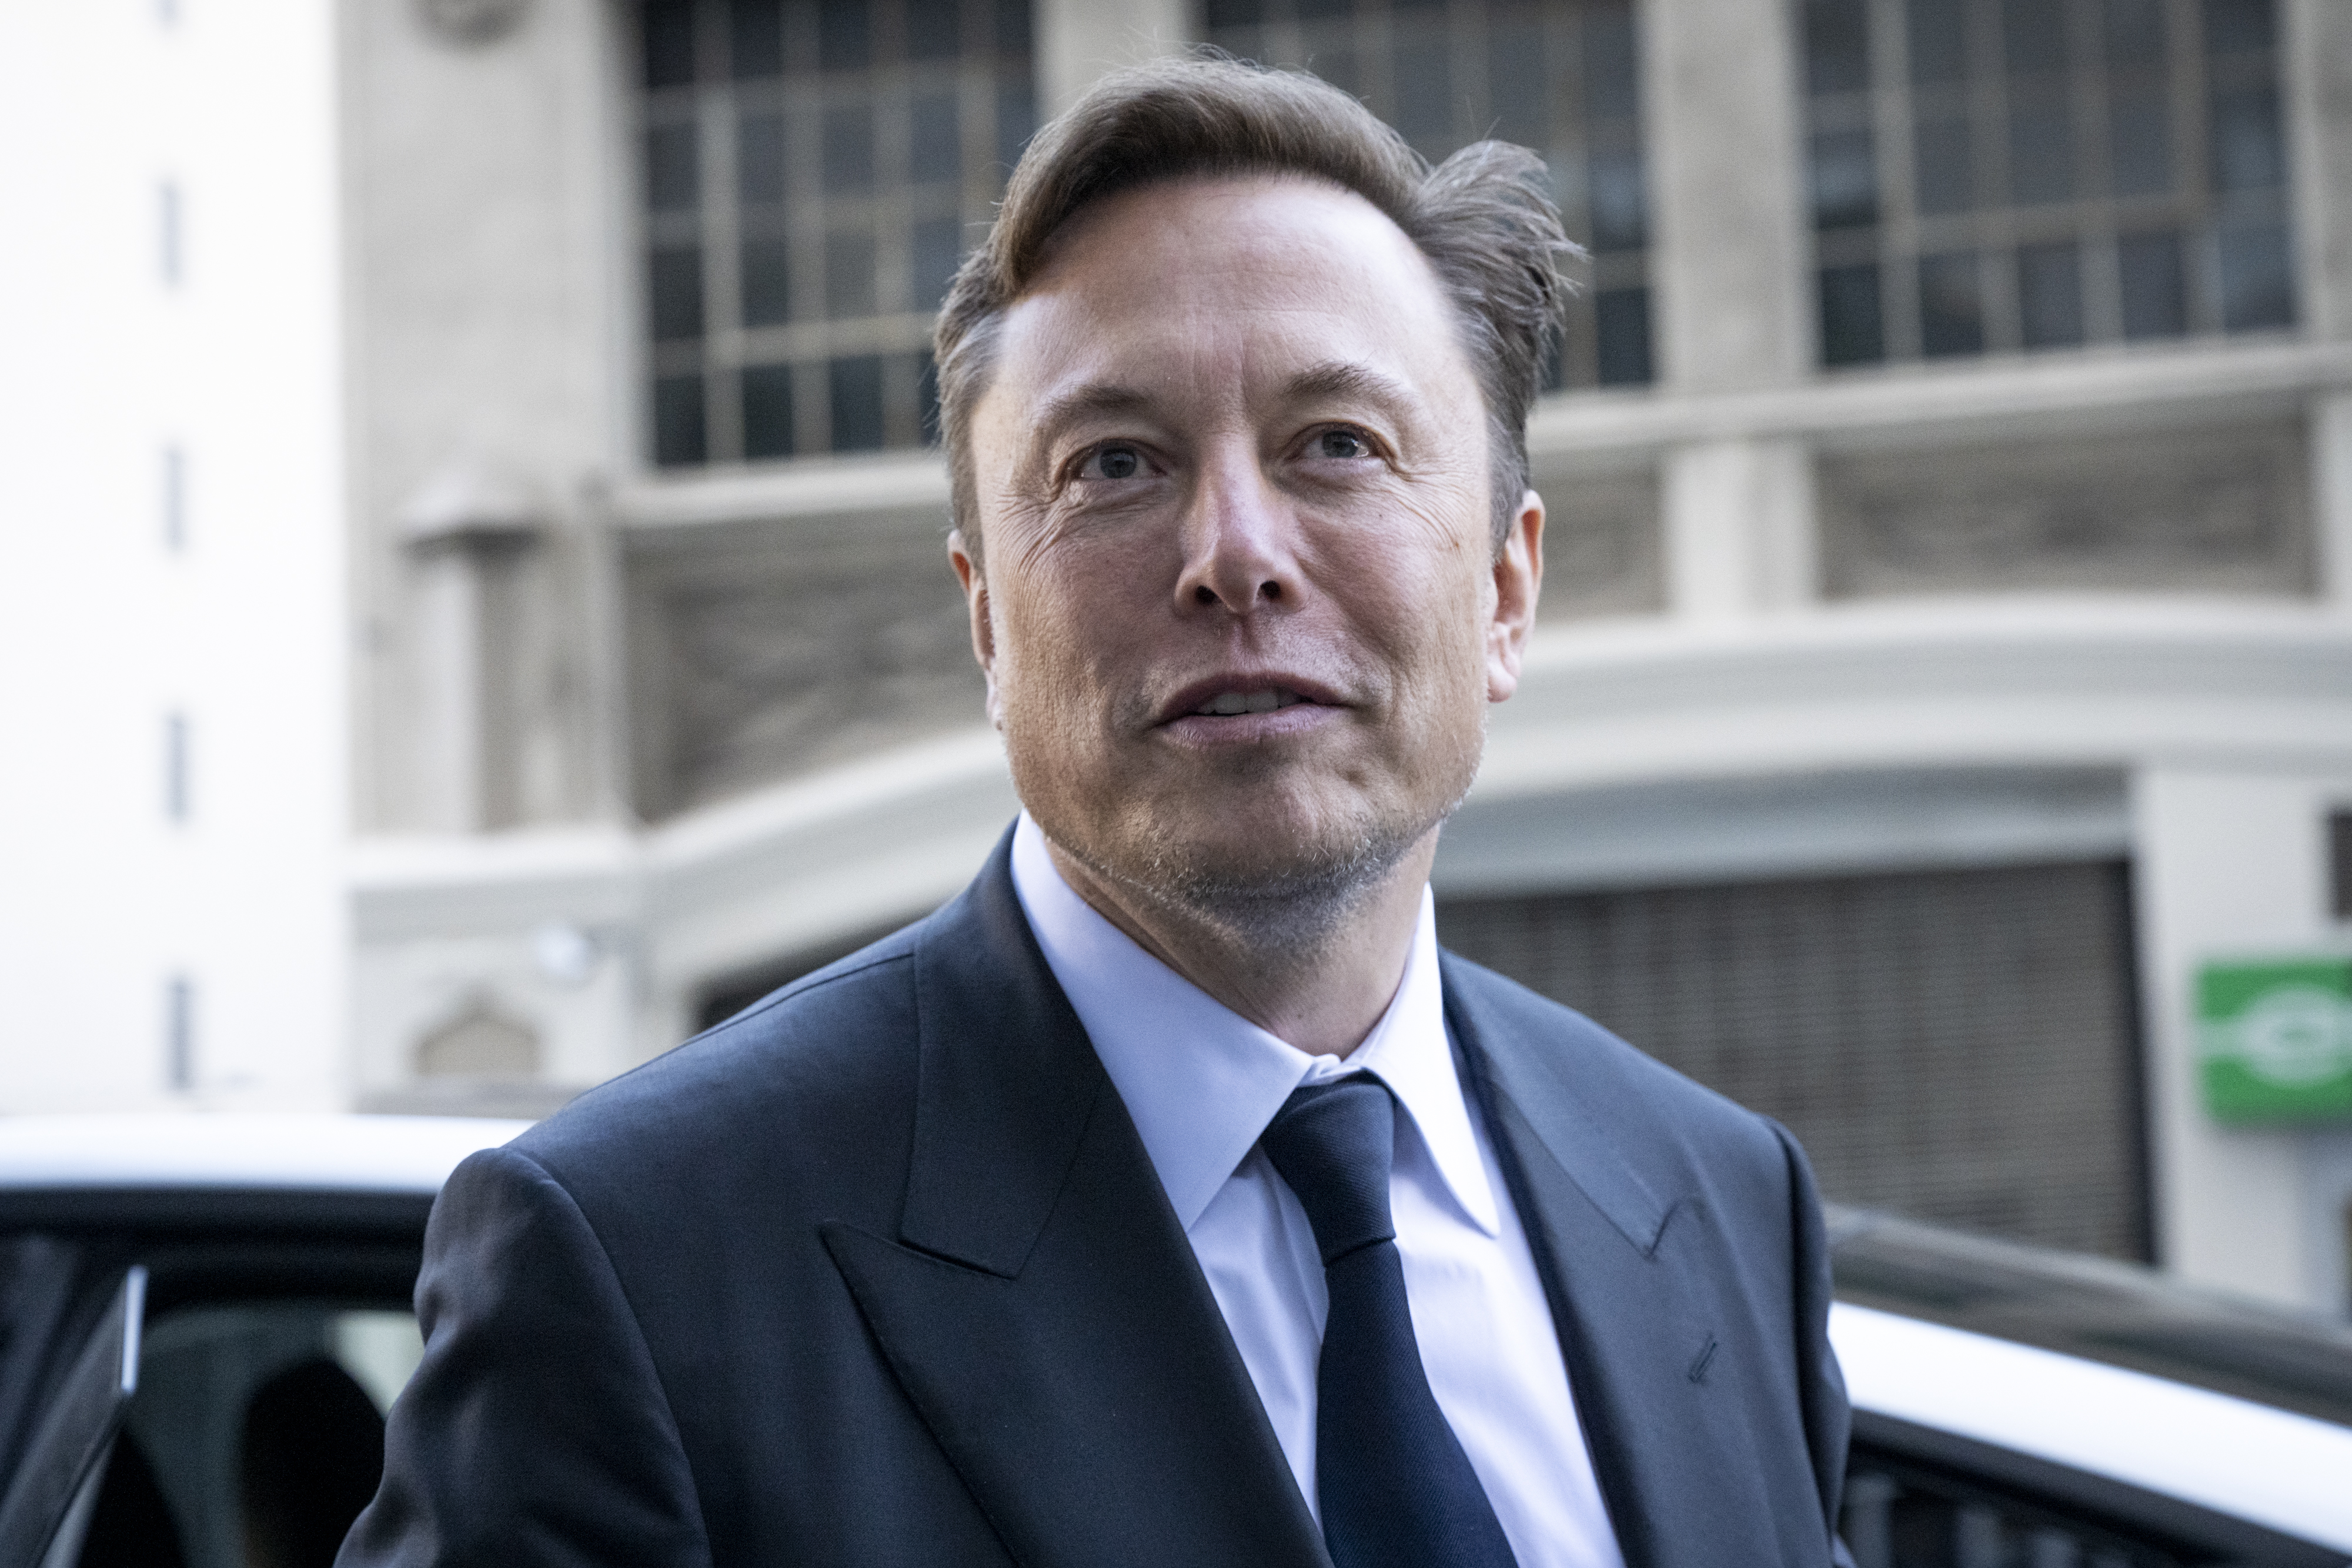 'Just Another Hype Cycle': Elon Musk Reportedly Building 'Based AI' Because ChatGPT Is Too Woke